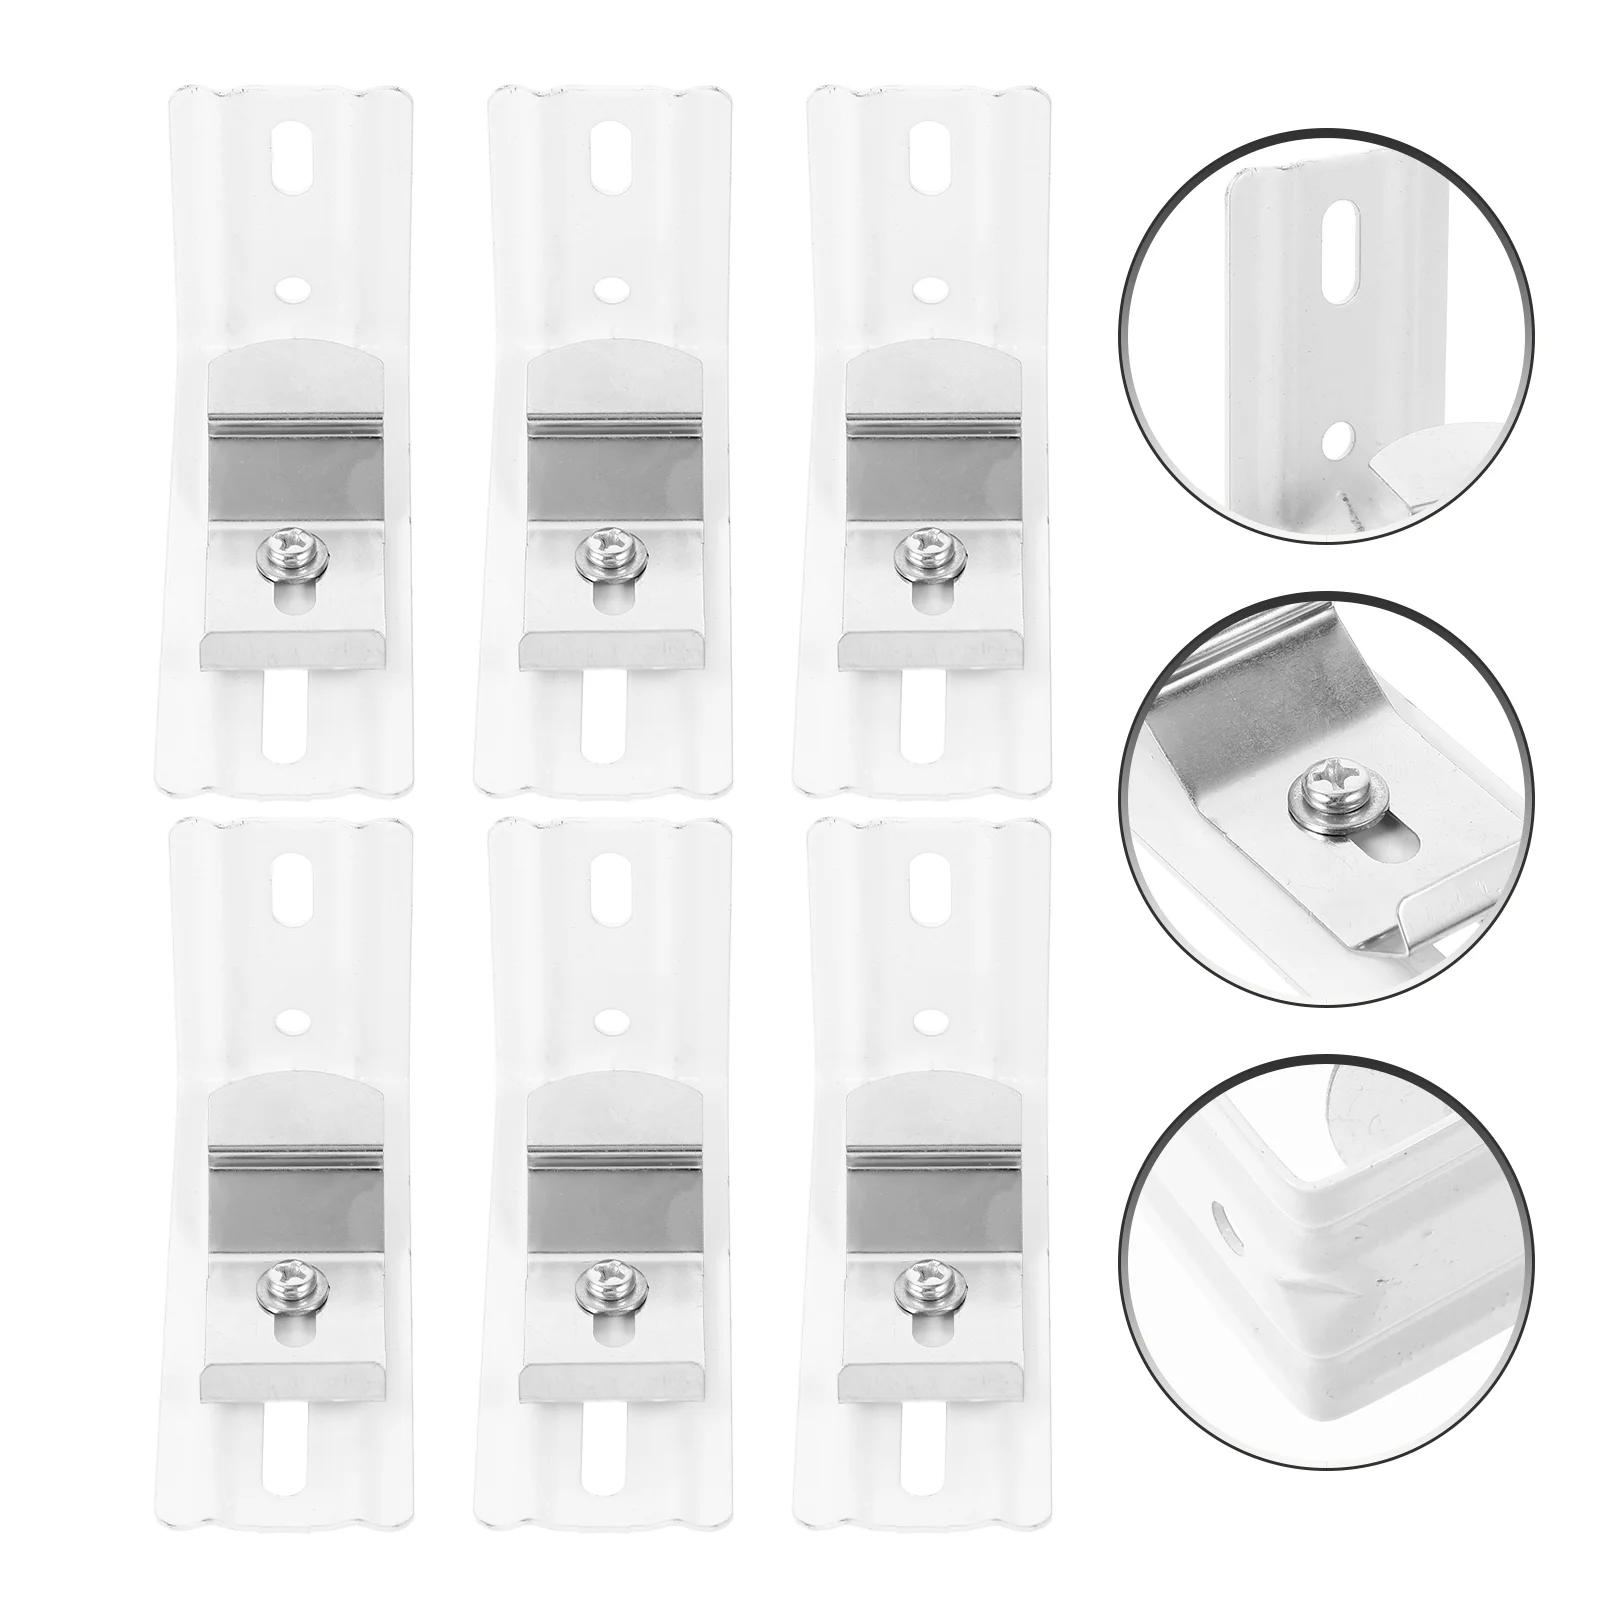 

6 Pcs Mounting Brackets Valance Clips For Curtain Rods Over Blinds Household Rail Track Metal Vertical Replacement Slats